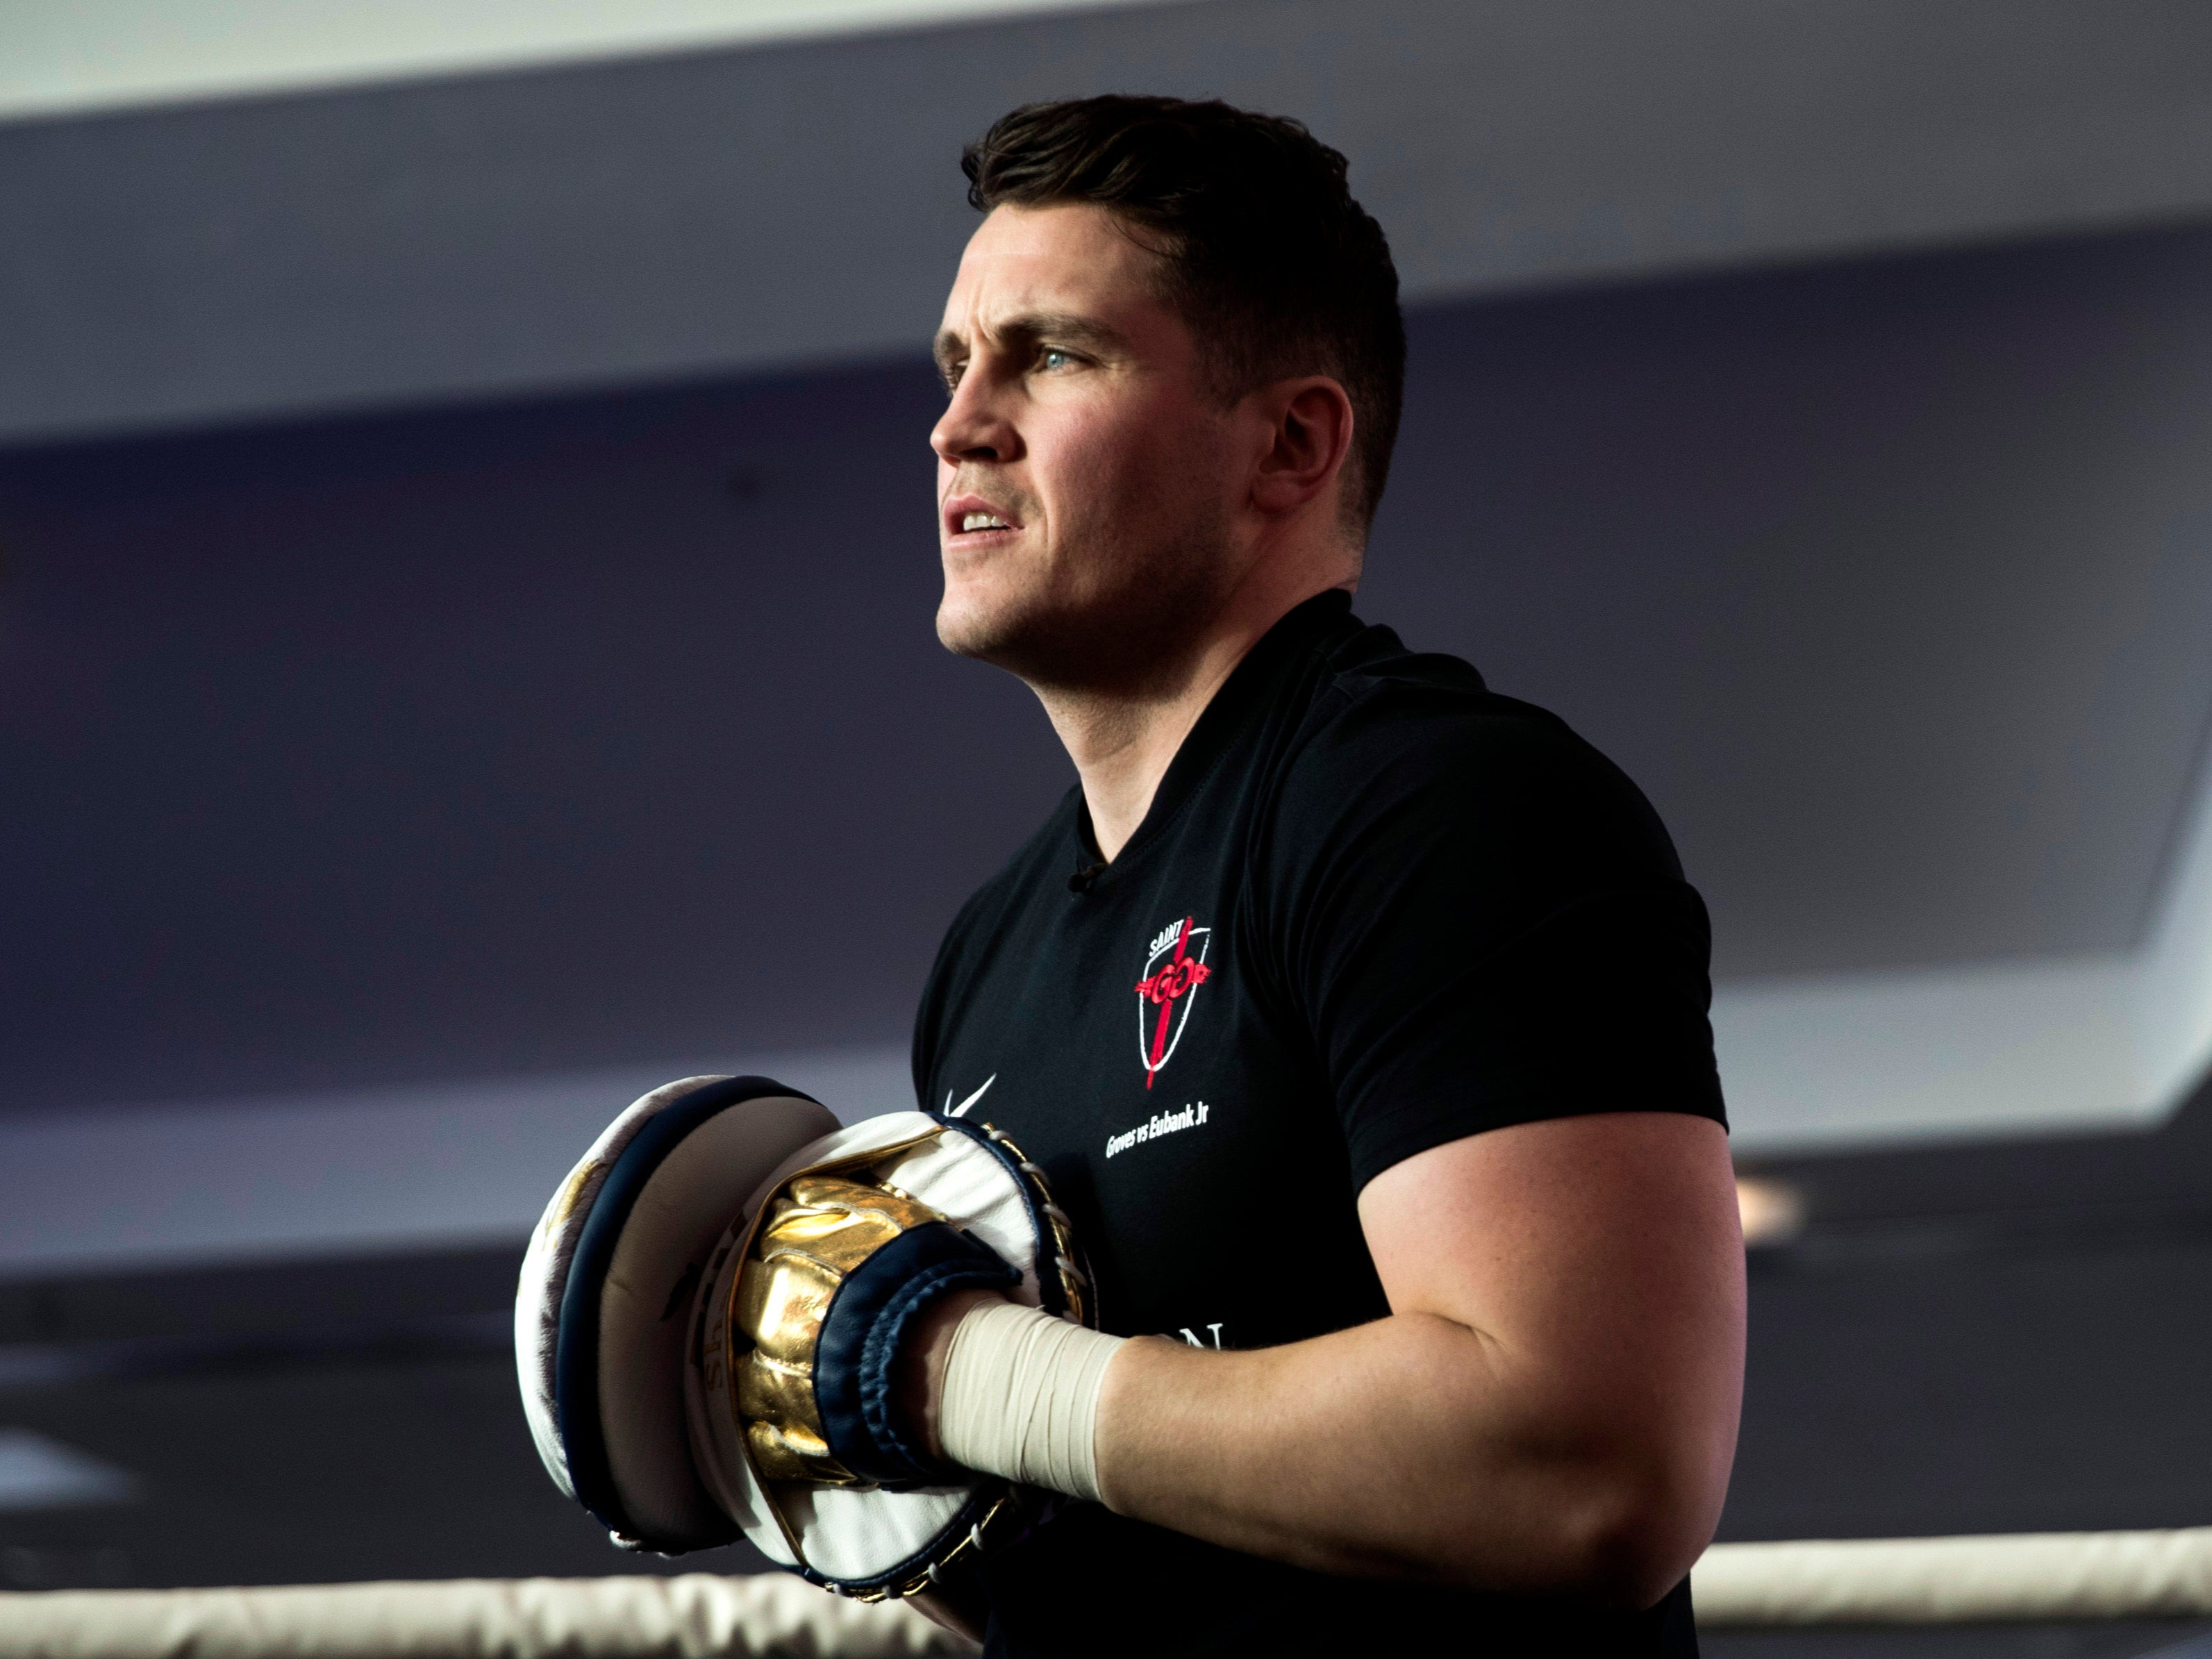 McGuigan has trained four fighters to world titles since 2015, but a bitter legal dispute sorely tested his love for boxing